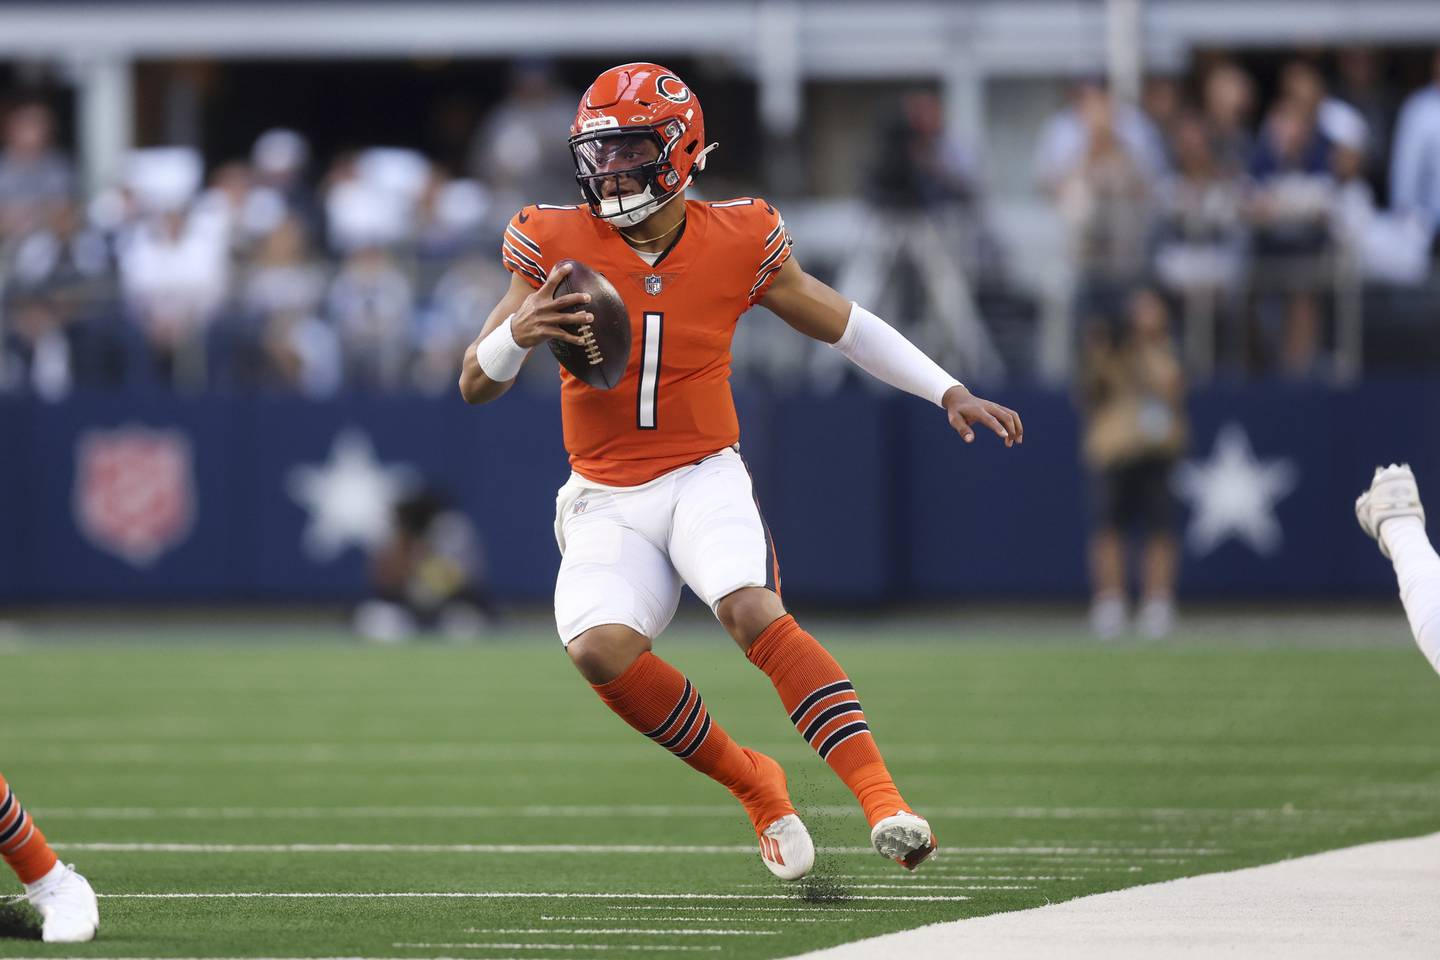 Chicago Bears quarterback Justin Fields runs the ball during the first quarter against the Dallas Cowboys, Oct. 30, 2022, at AT&T Stadium in Arlington, Texas.